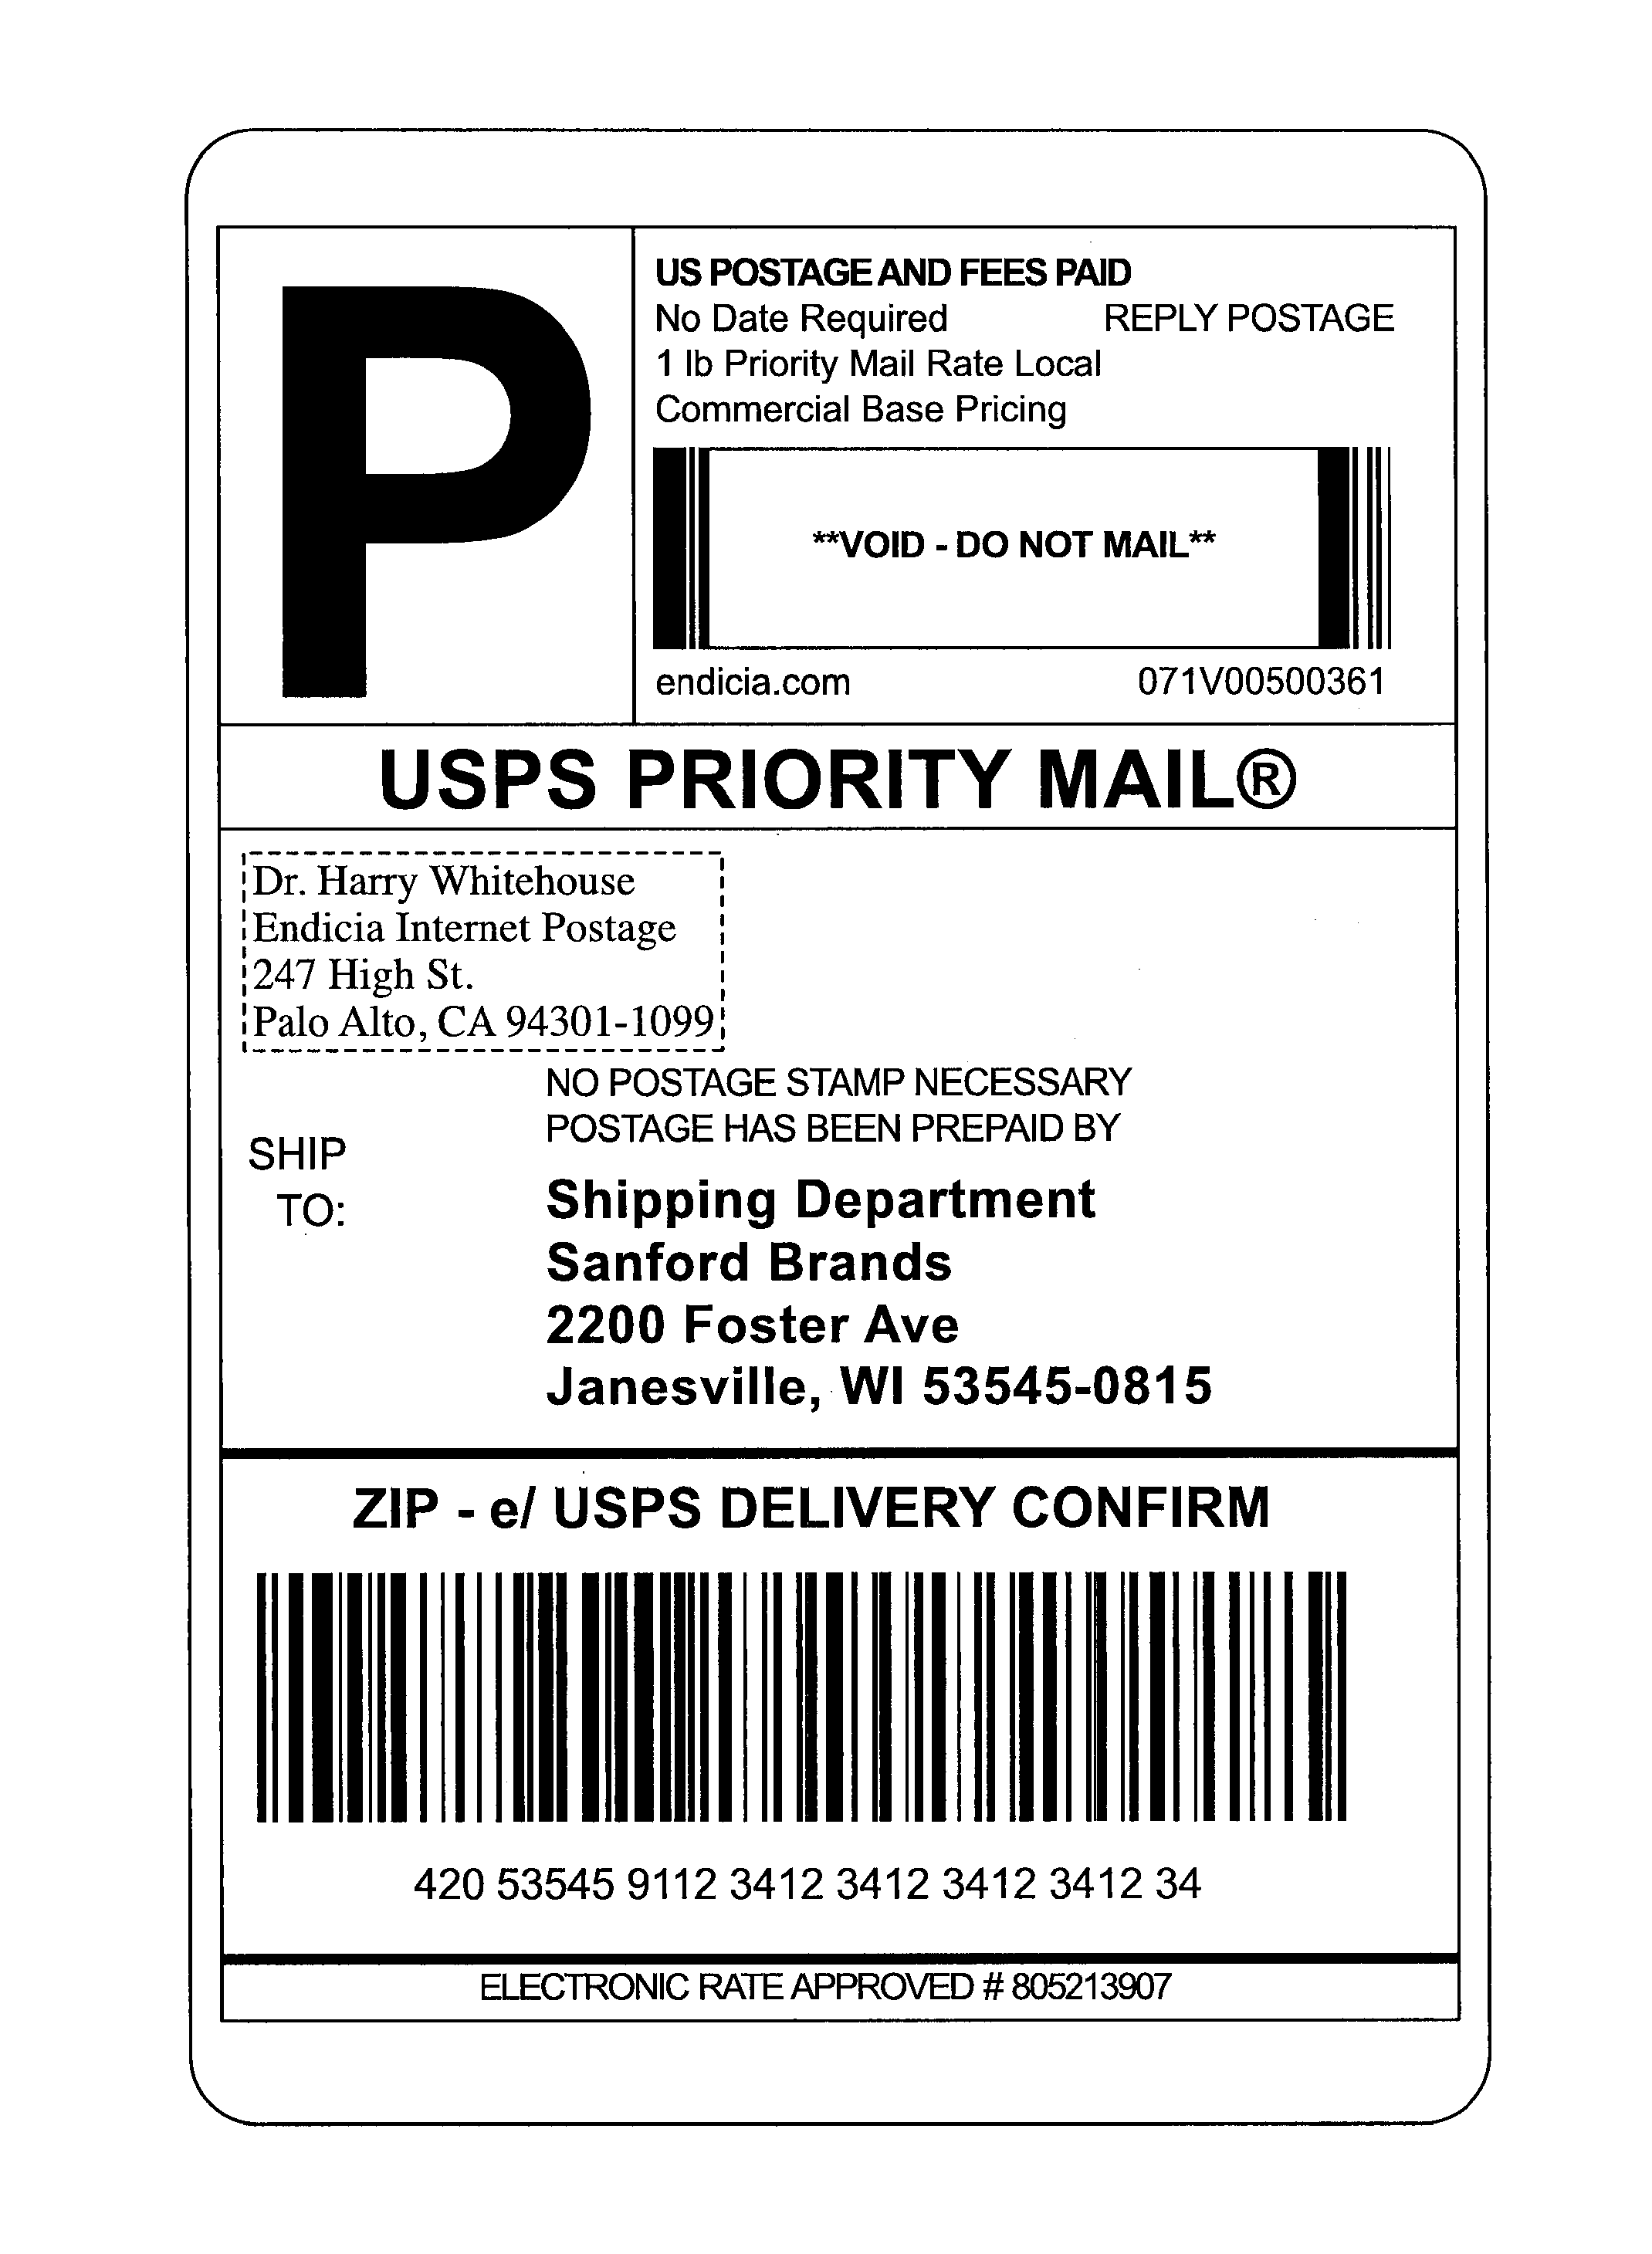 23 Usps Postage Label Printer - Labels Design Ideas 23 Throughout Package Shipping Label Template